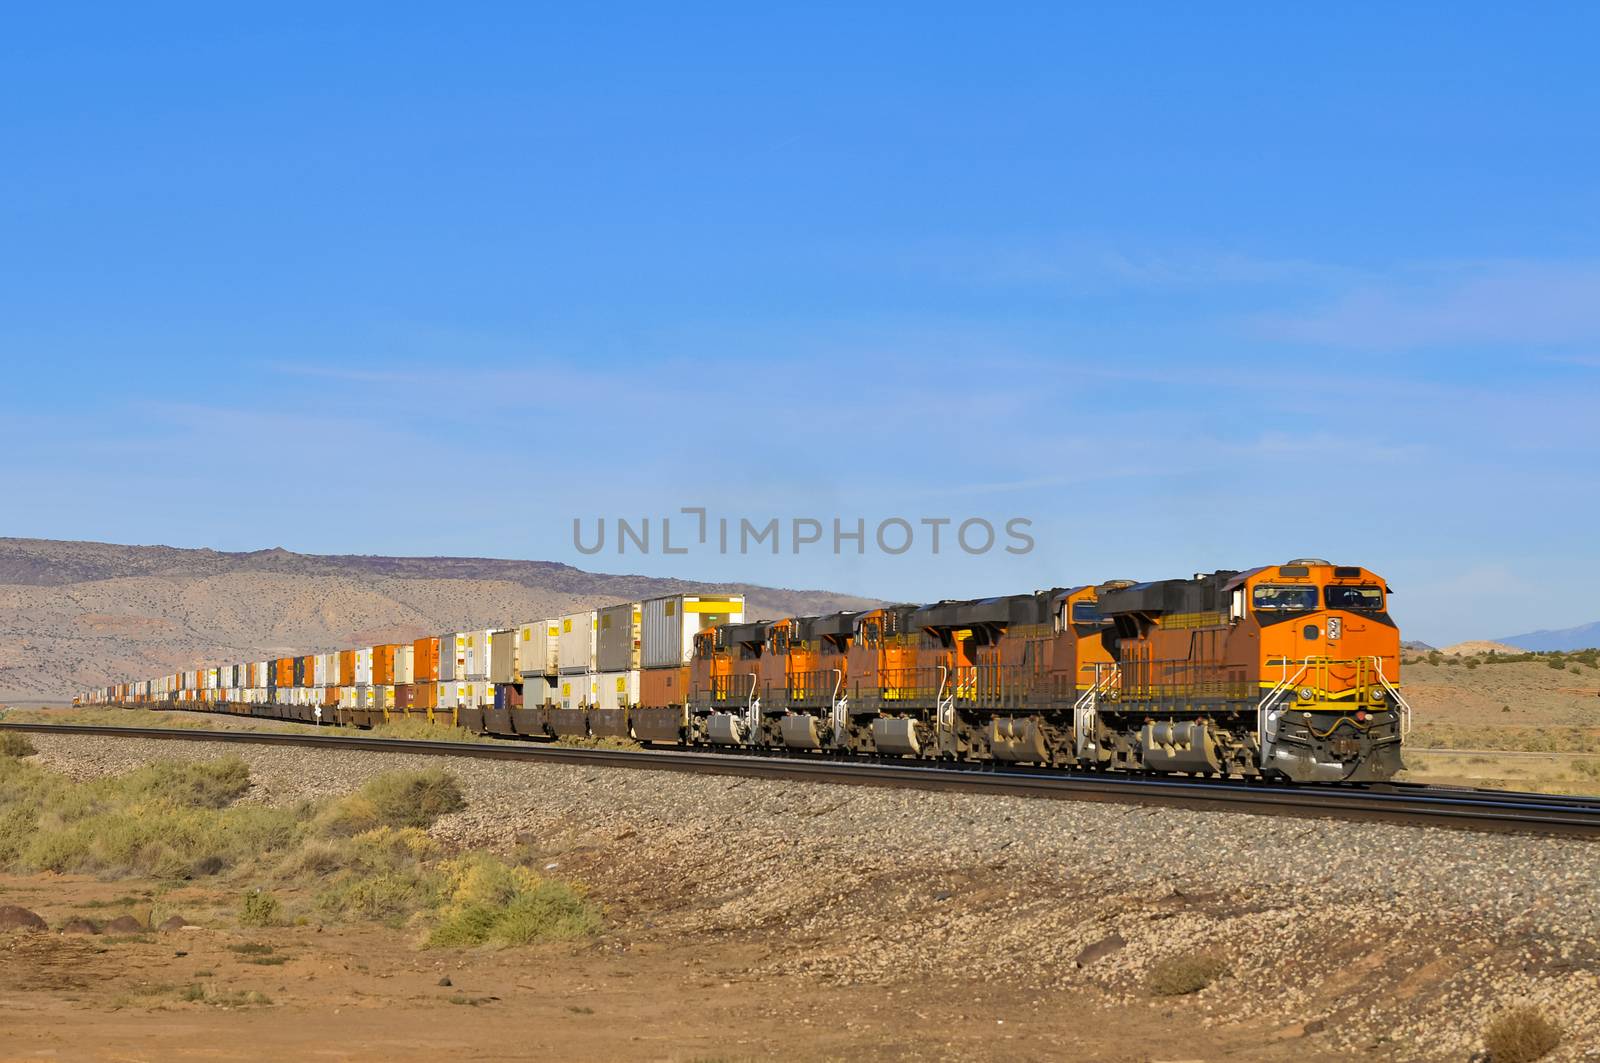 freight train loaded with containers by itsajoop